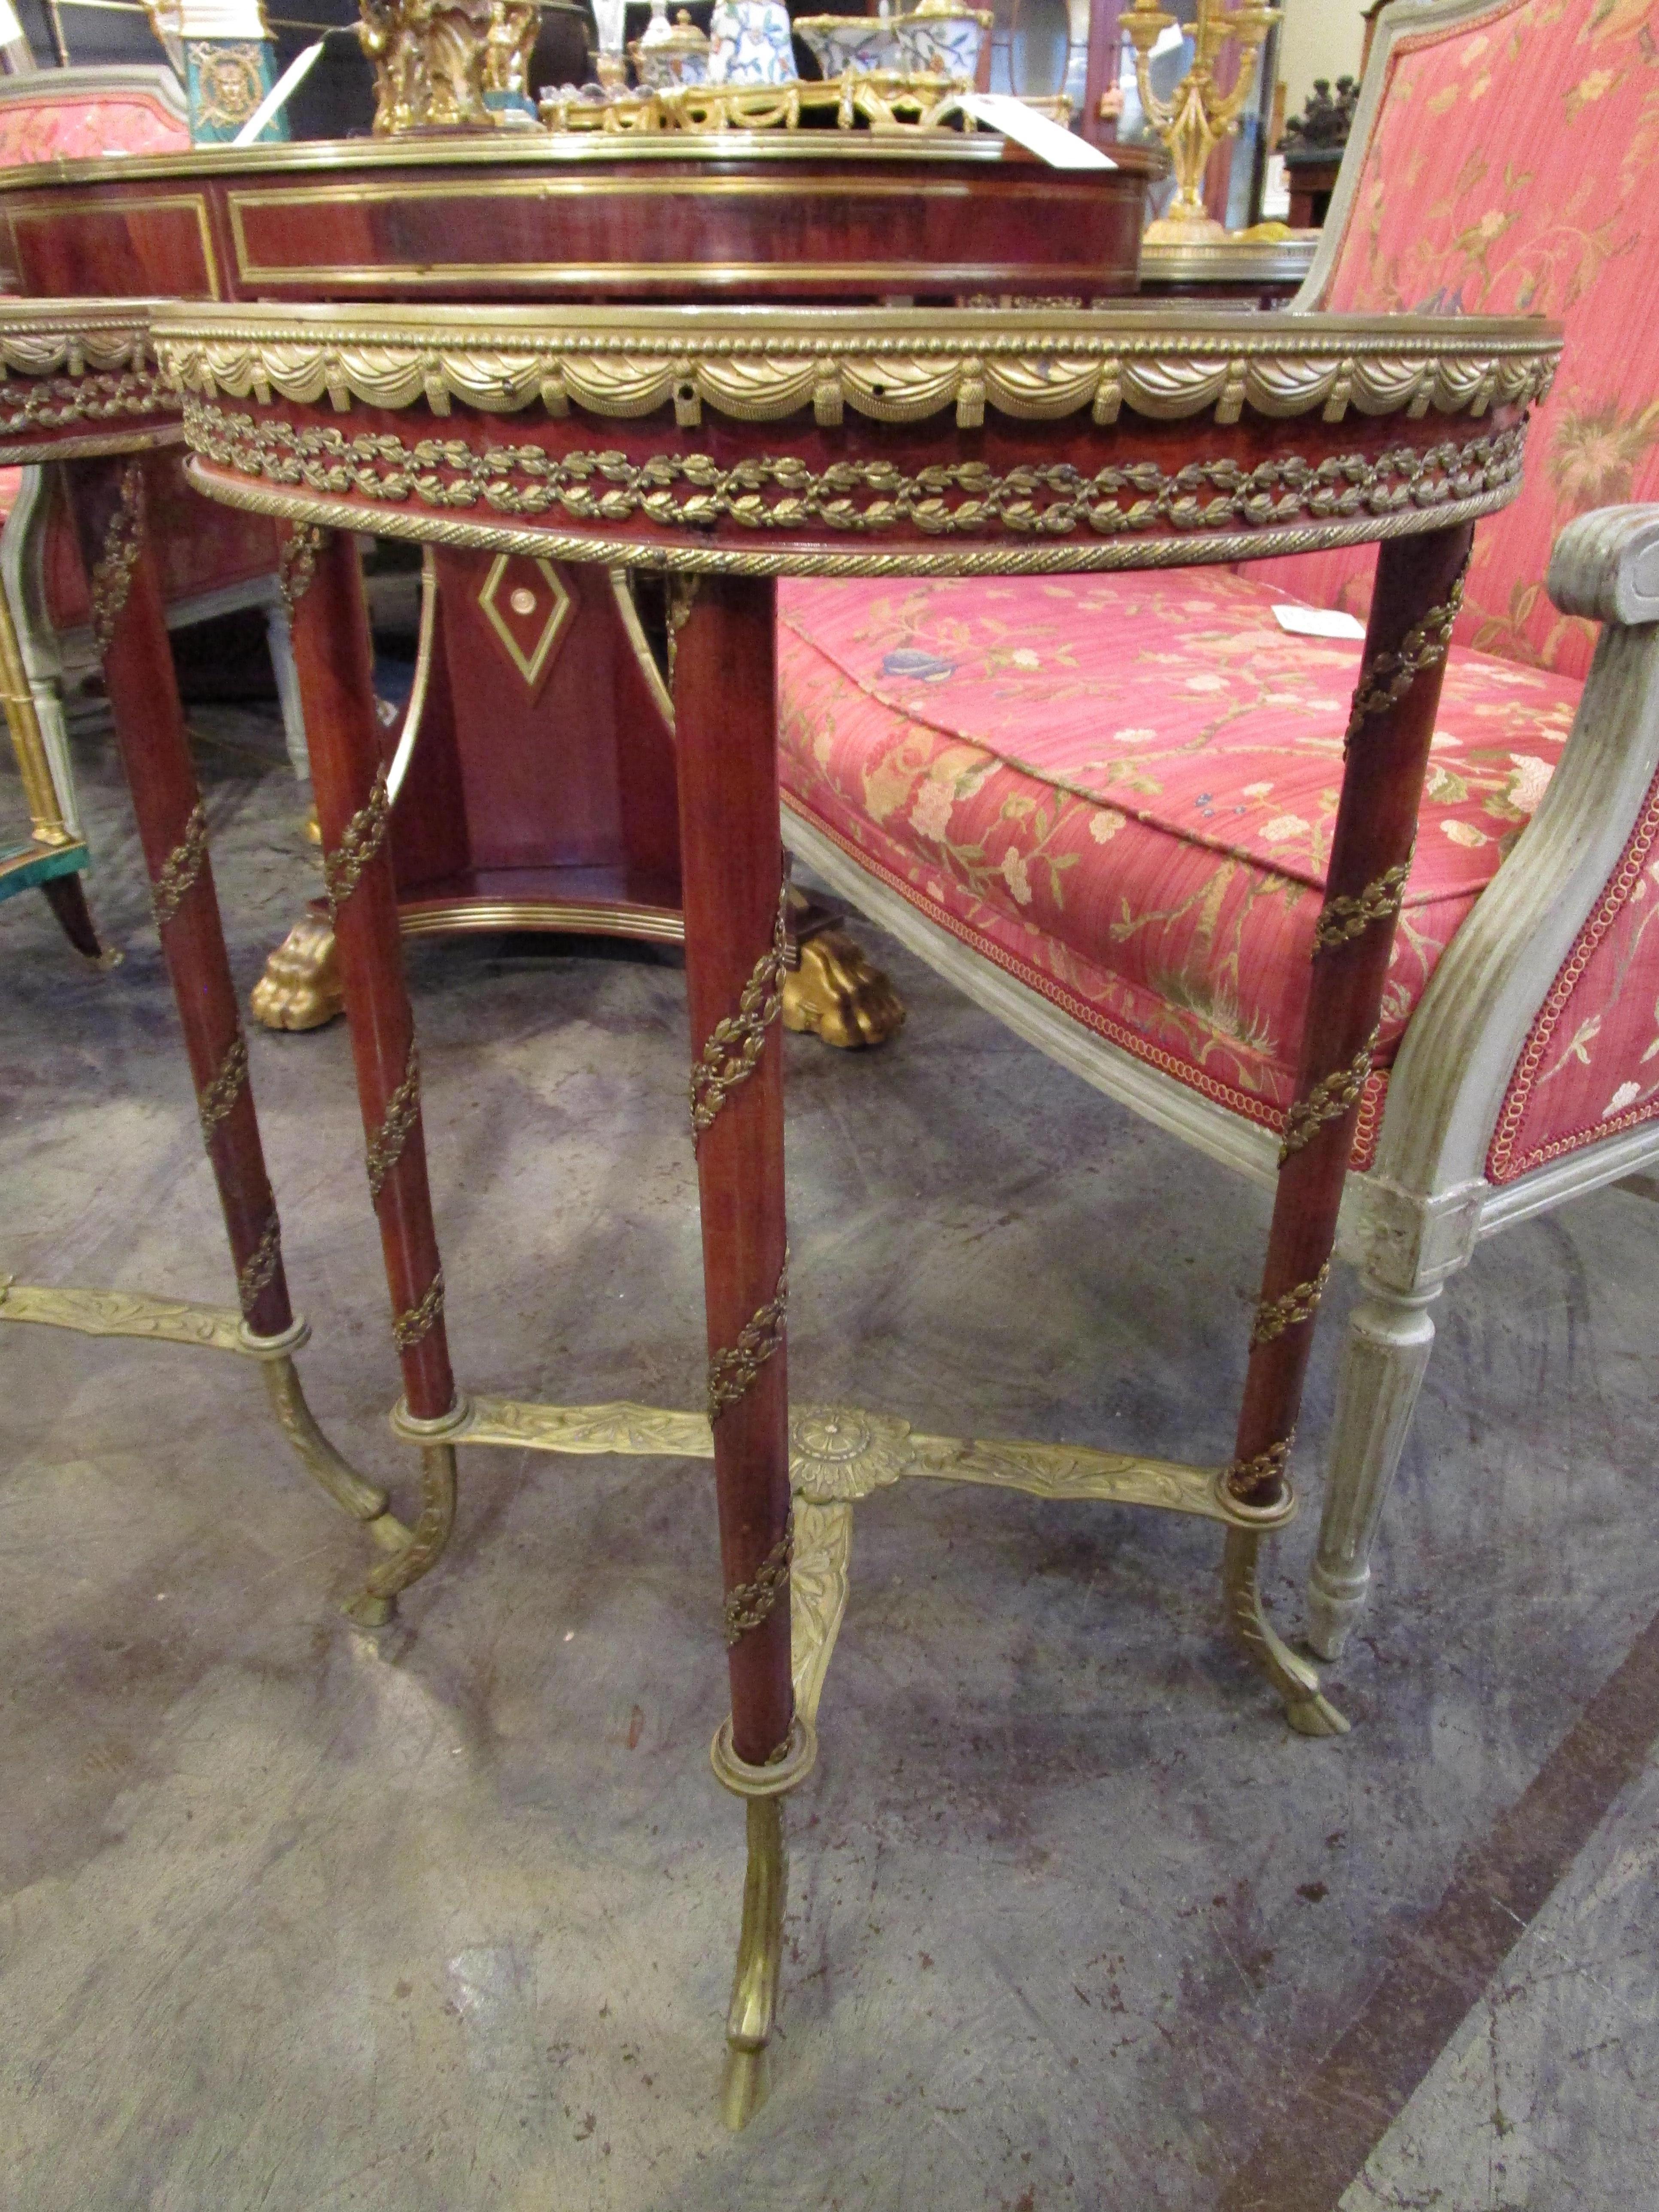 A fine pair of French mahogany and gilt bronze gueridon tables with marble tops. Fine quality.